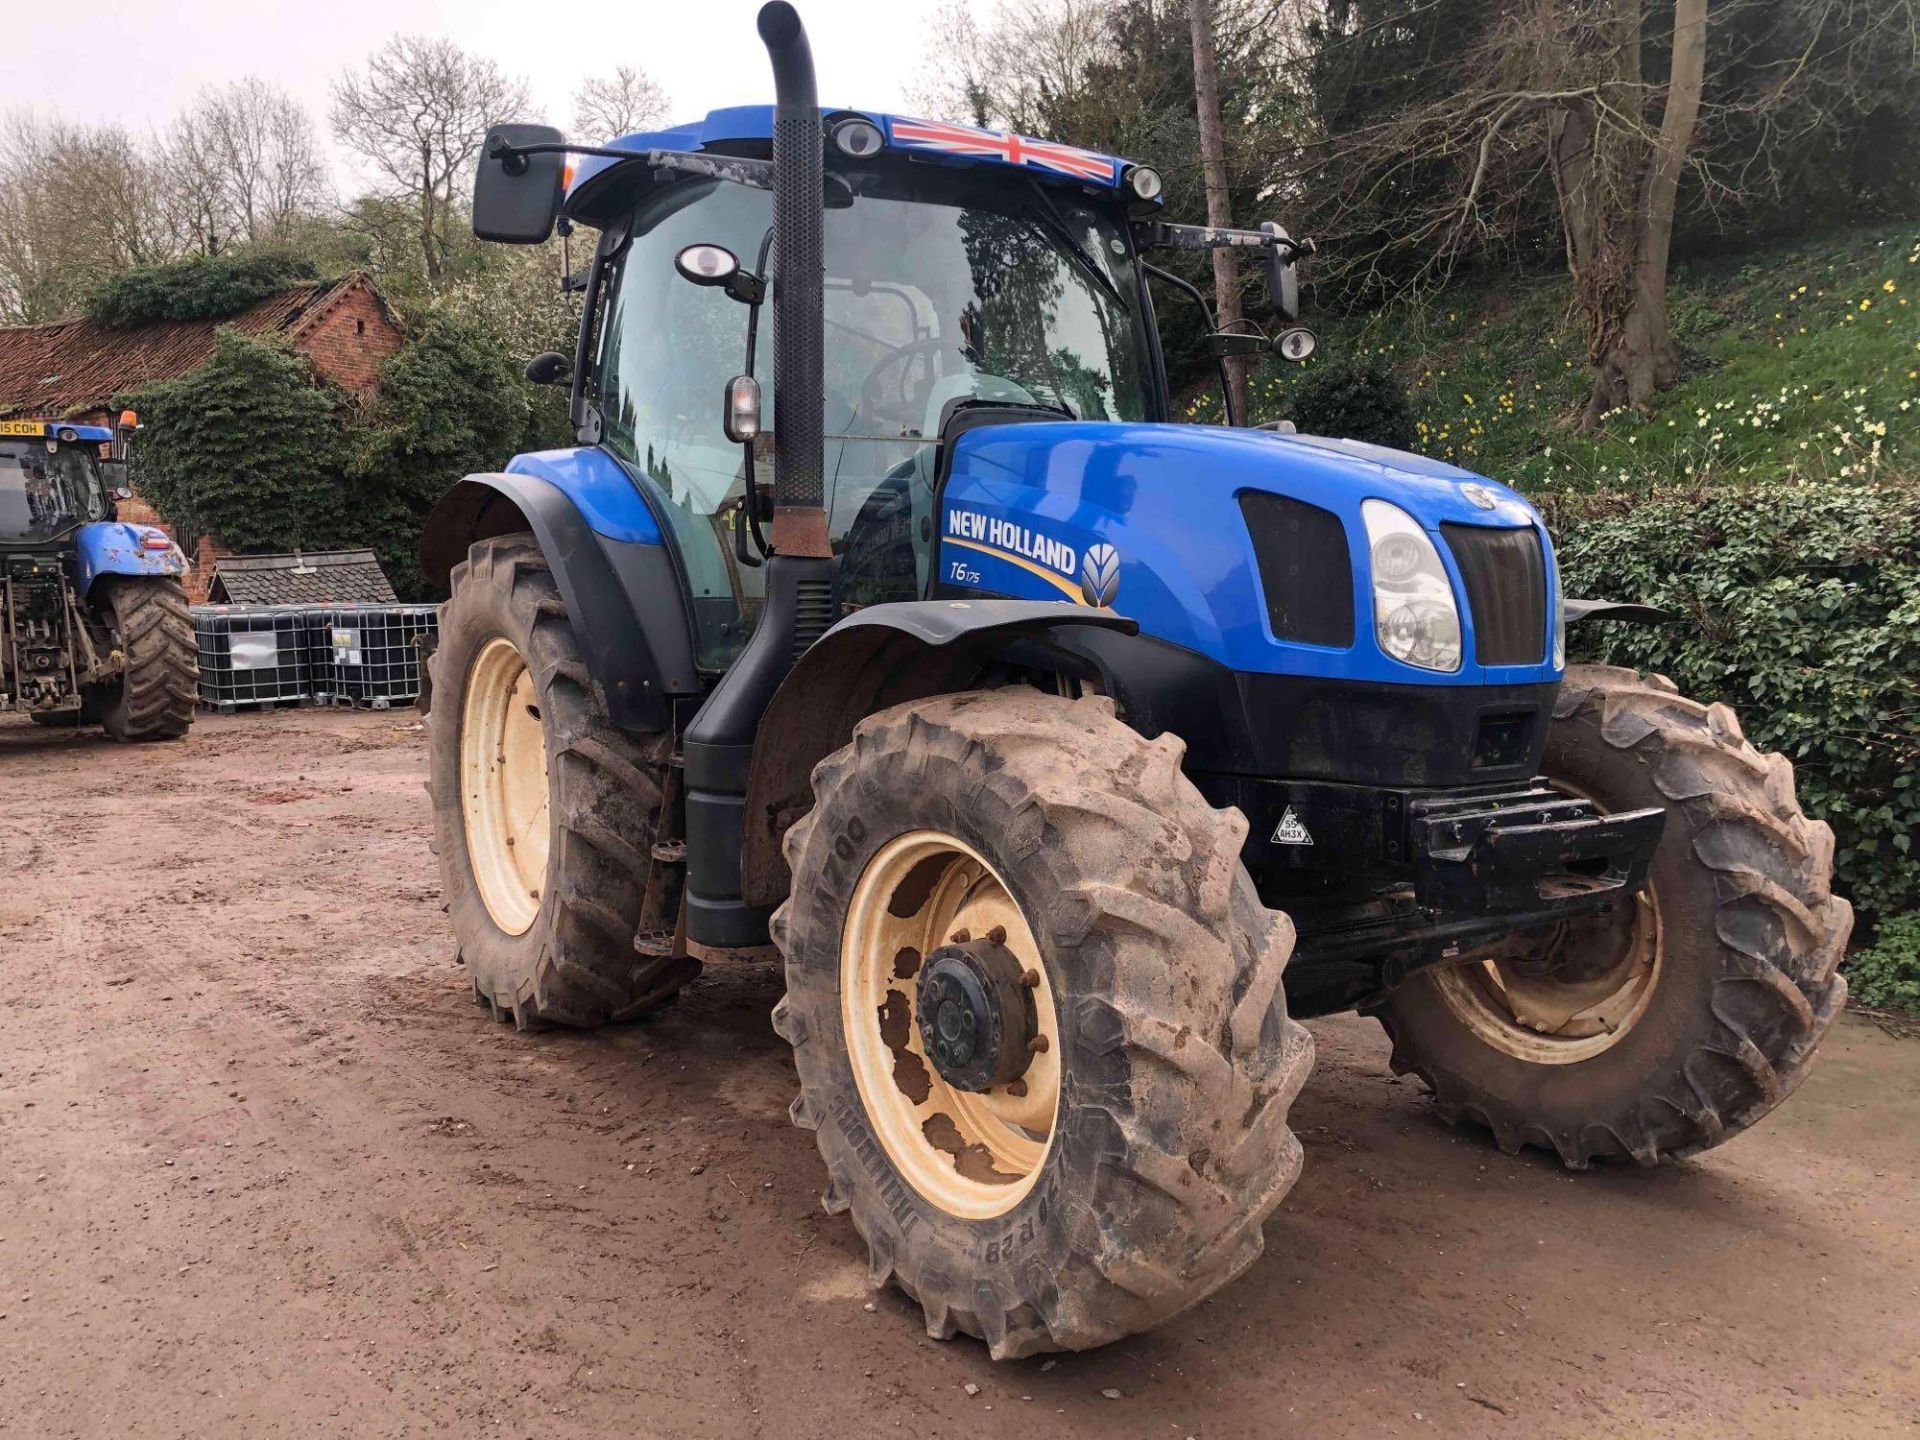 2013 New Holland T6.175 4wd tractor, 3 manual spools, air, on 420/70R28 front and 520/70R38 rear whe - Image 15 of 26